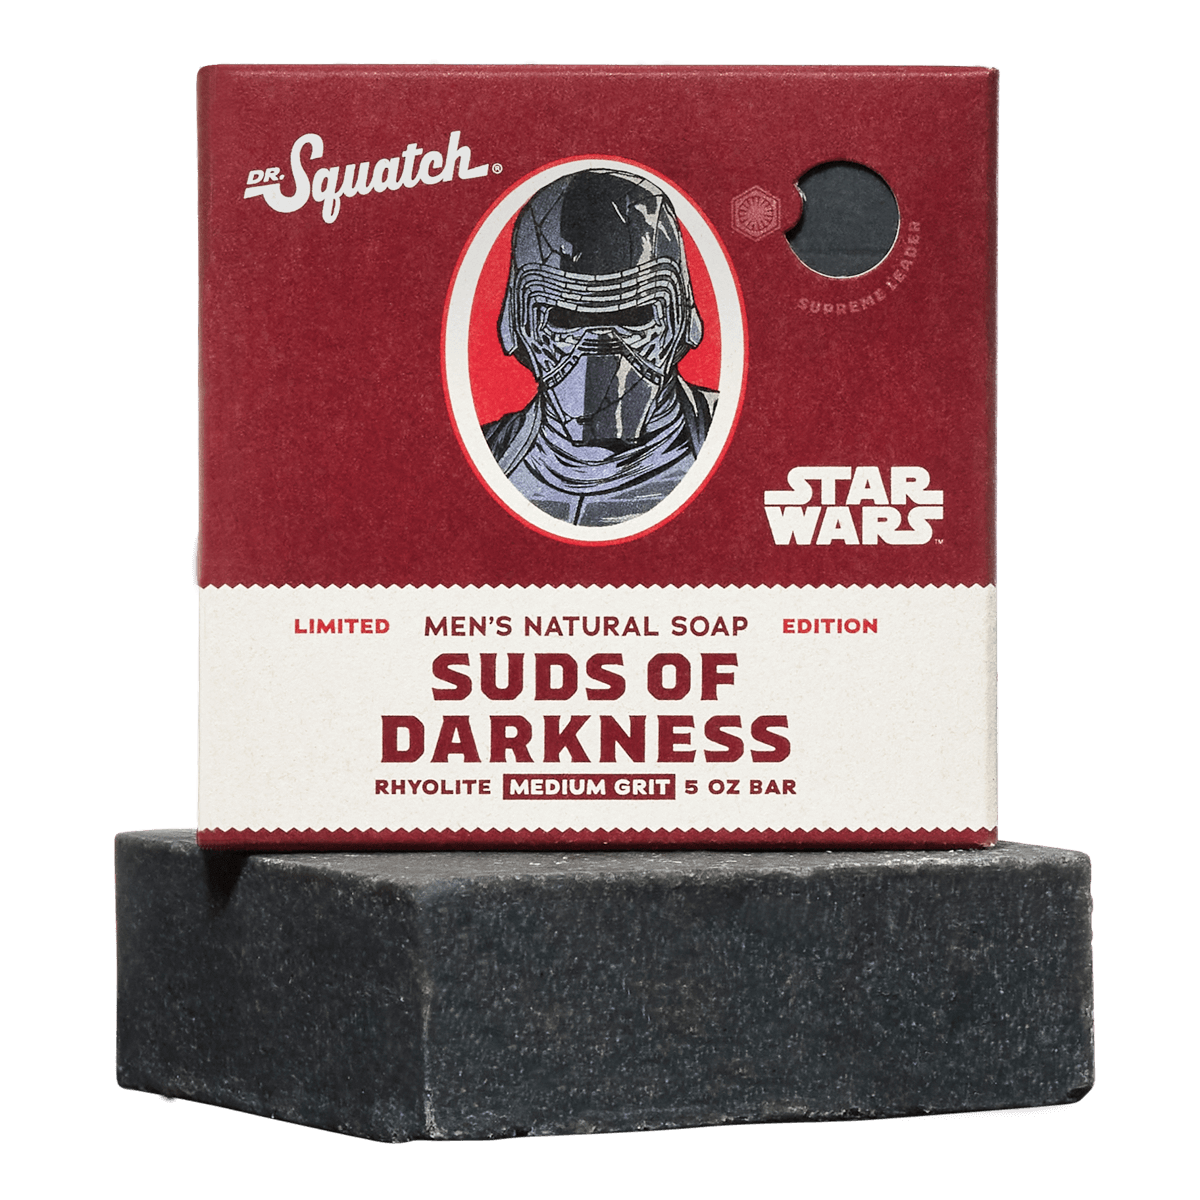 DR. Squatch Star Wars Collection Soap 4 Pack With Collector Box & Soap  Holder 851817007962